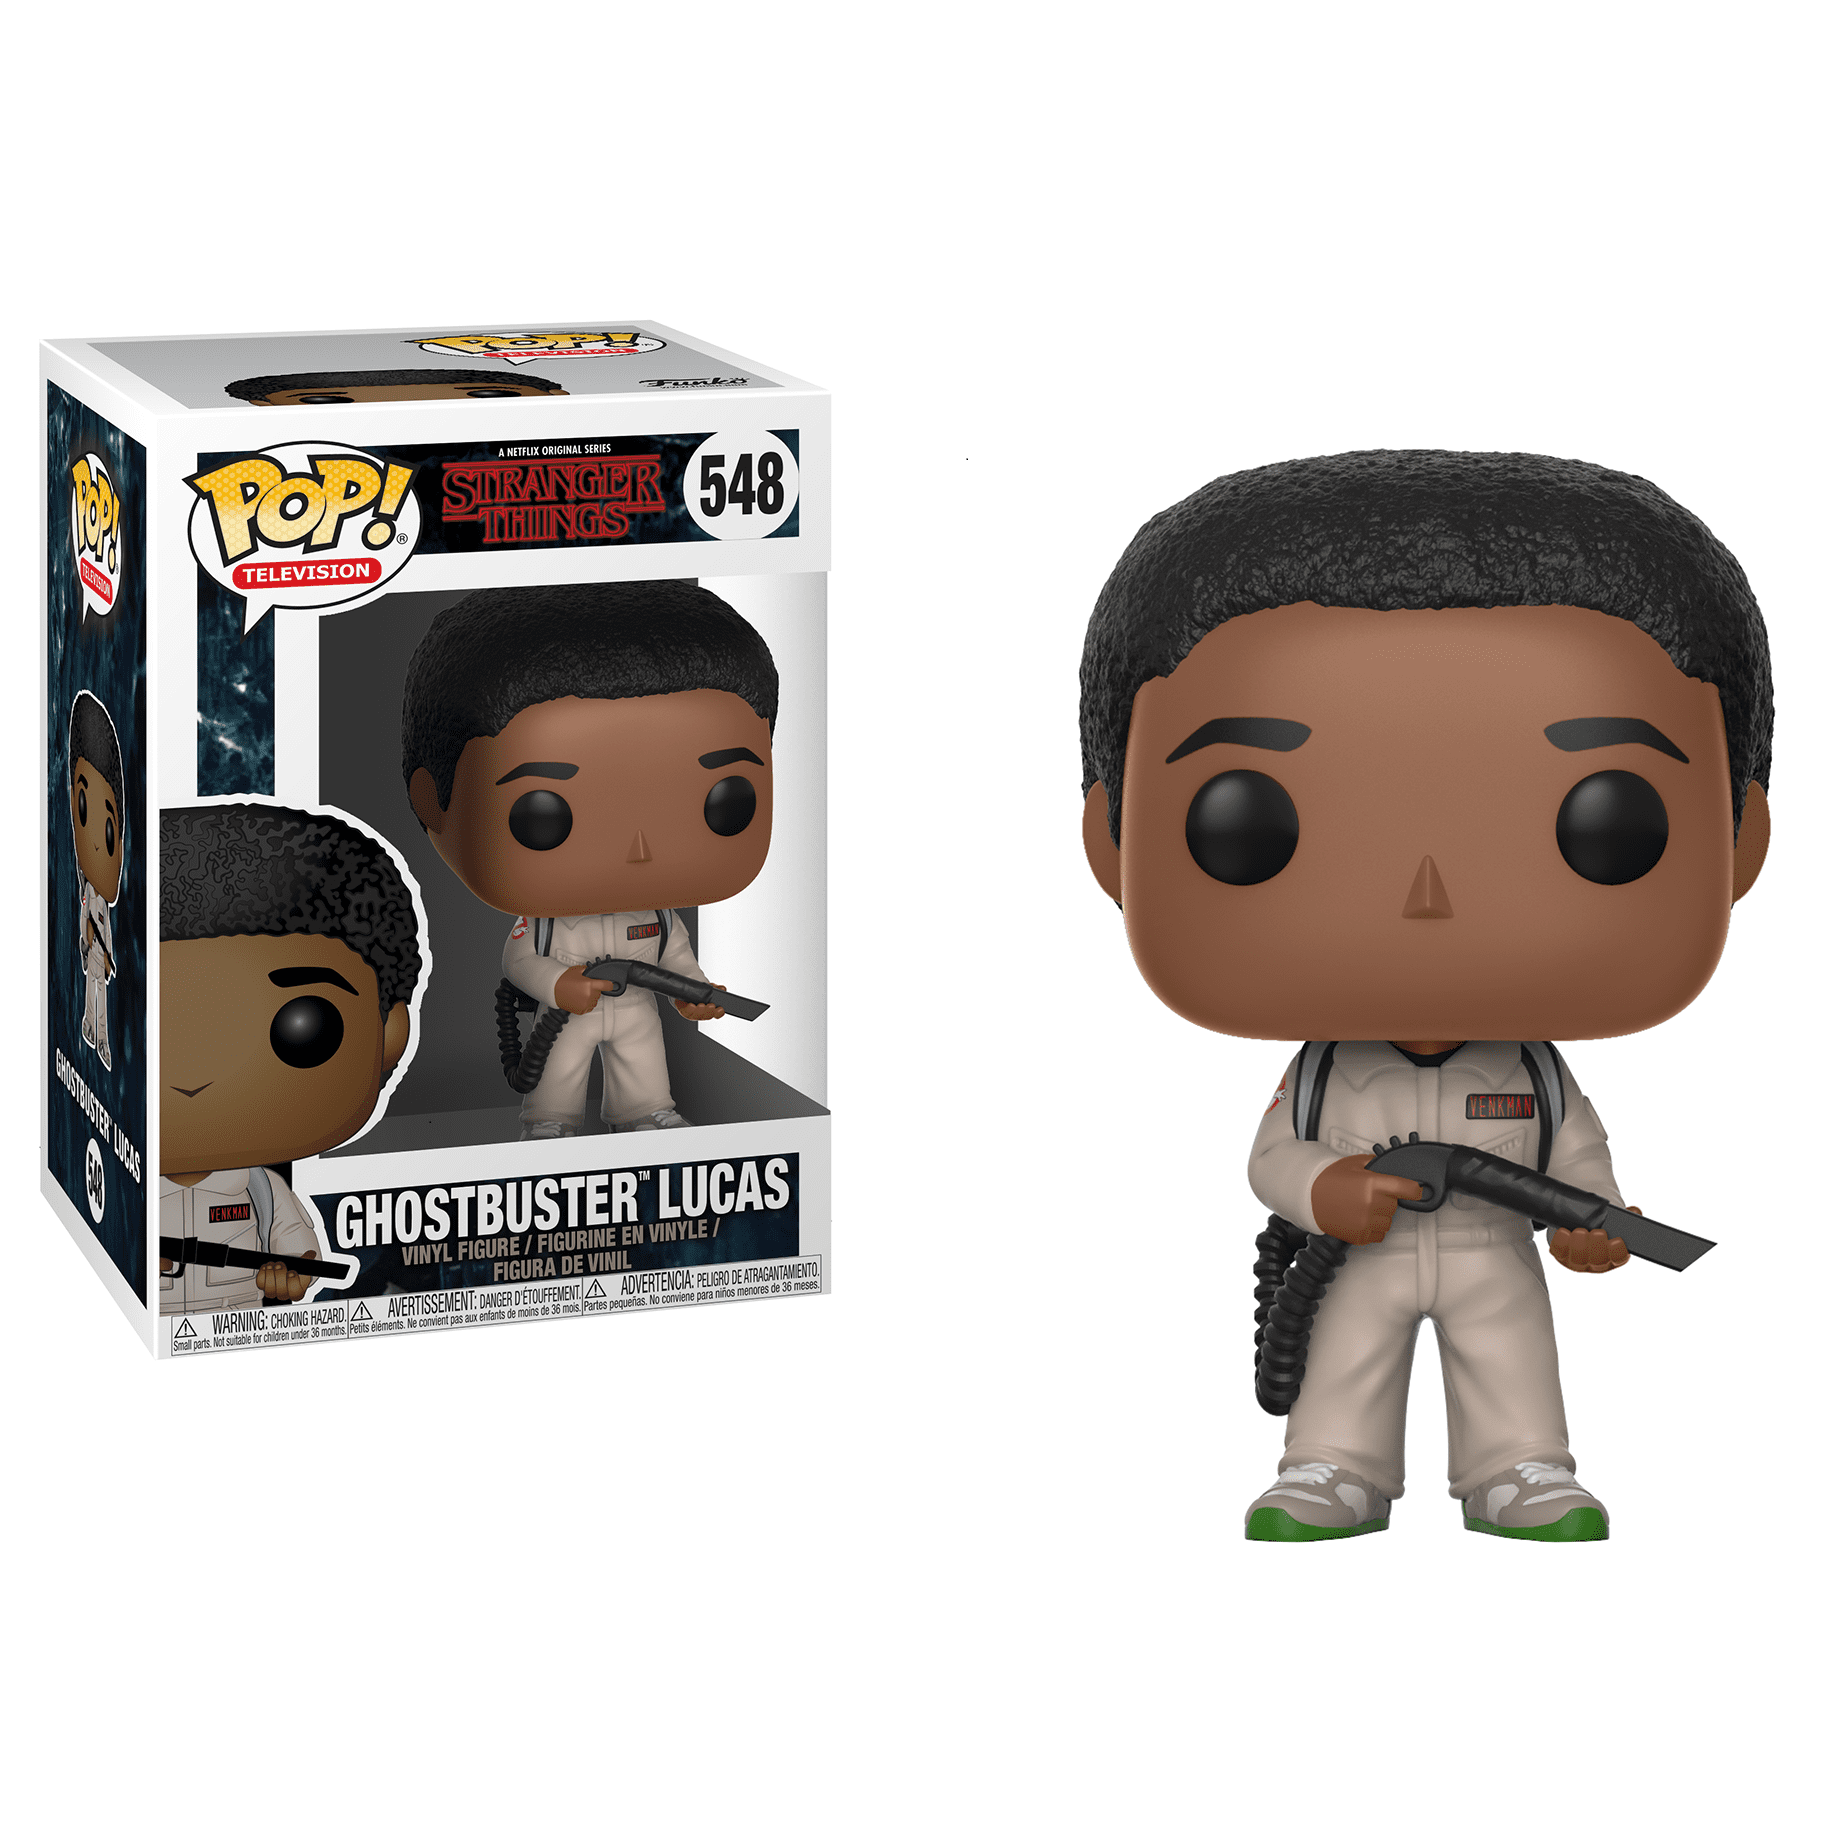 Lucas Ghostbusters Official Stranger Things Funko Pop Vinyl Figure Collectables 